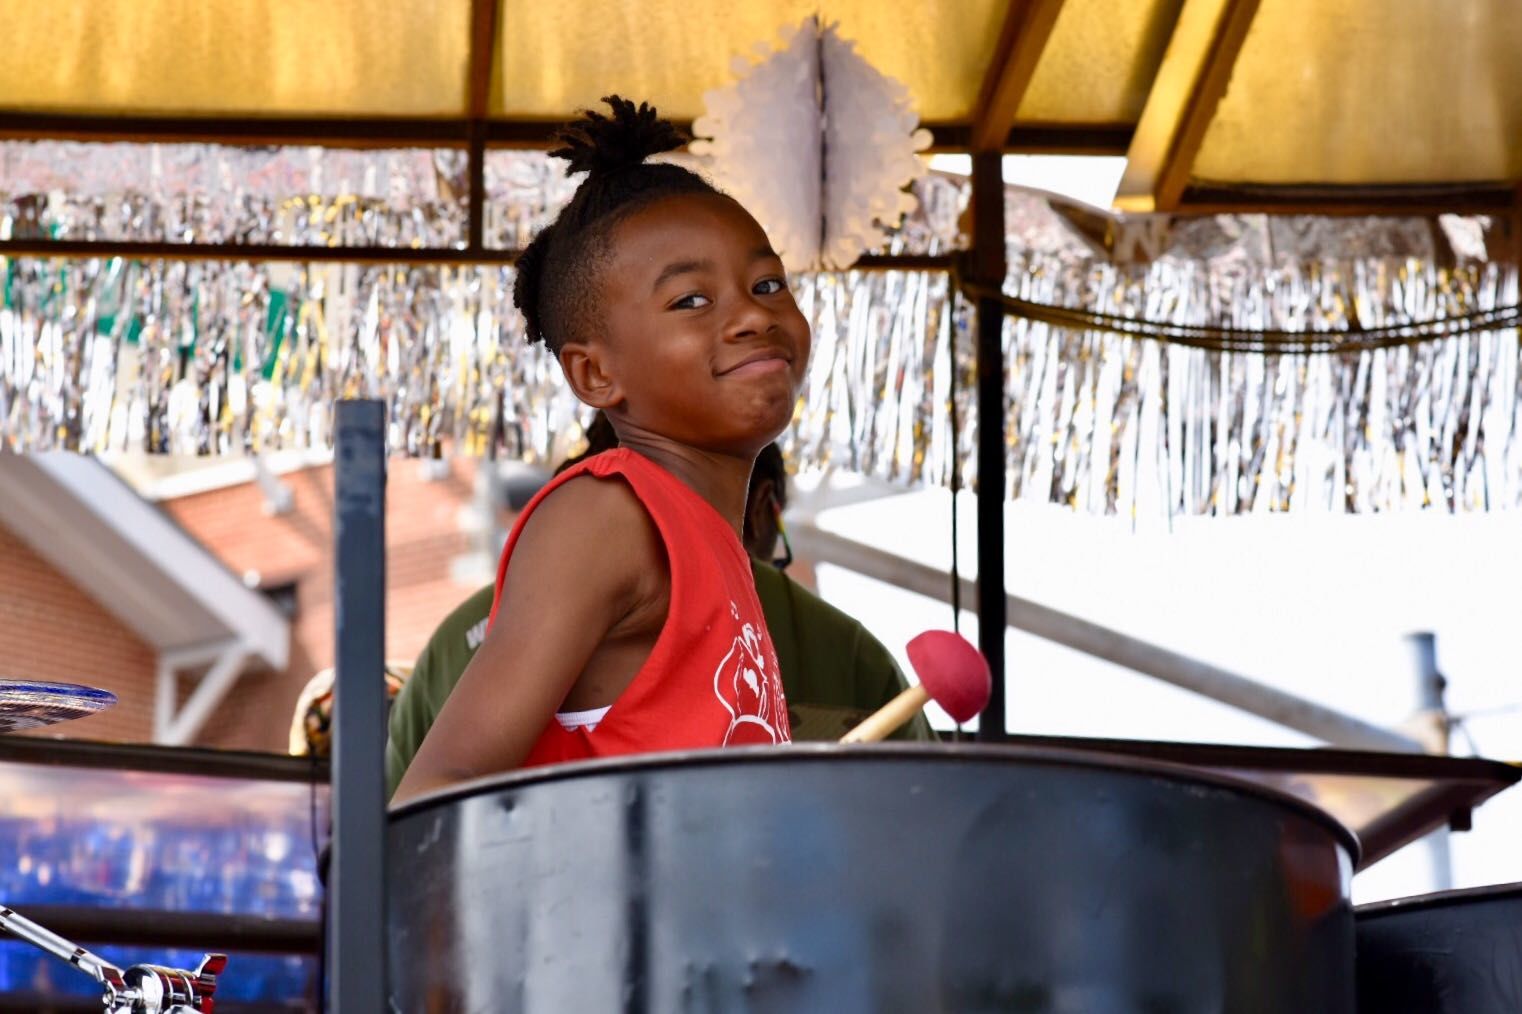 A member of the Panquilty Steel Drum unit in the Takoma Park Parade. (WTOP/Kate Ryan)